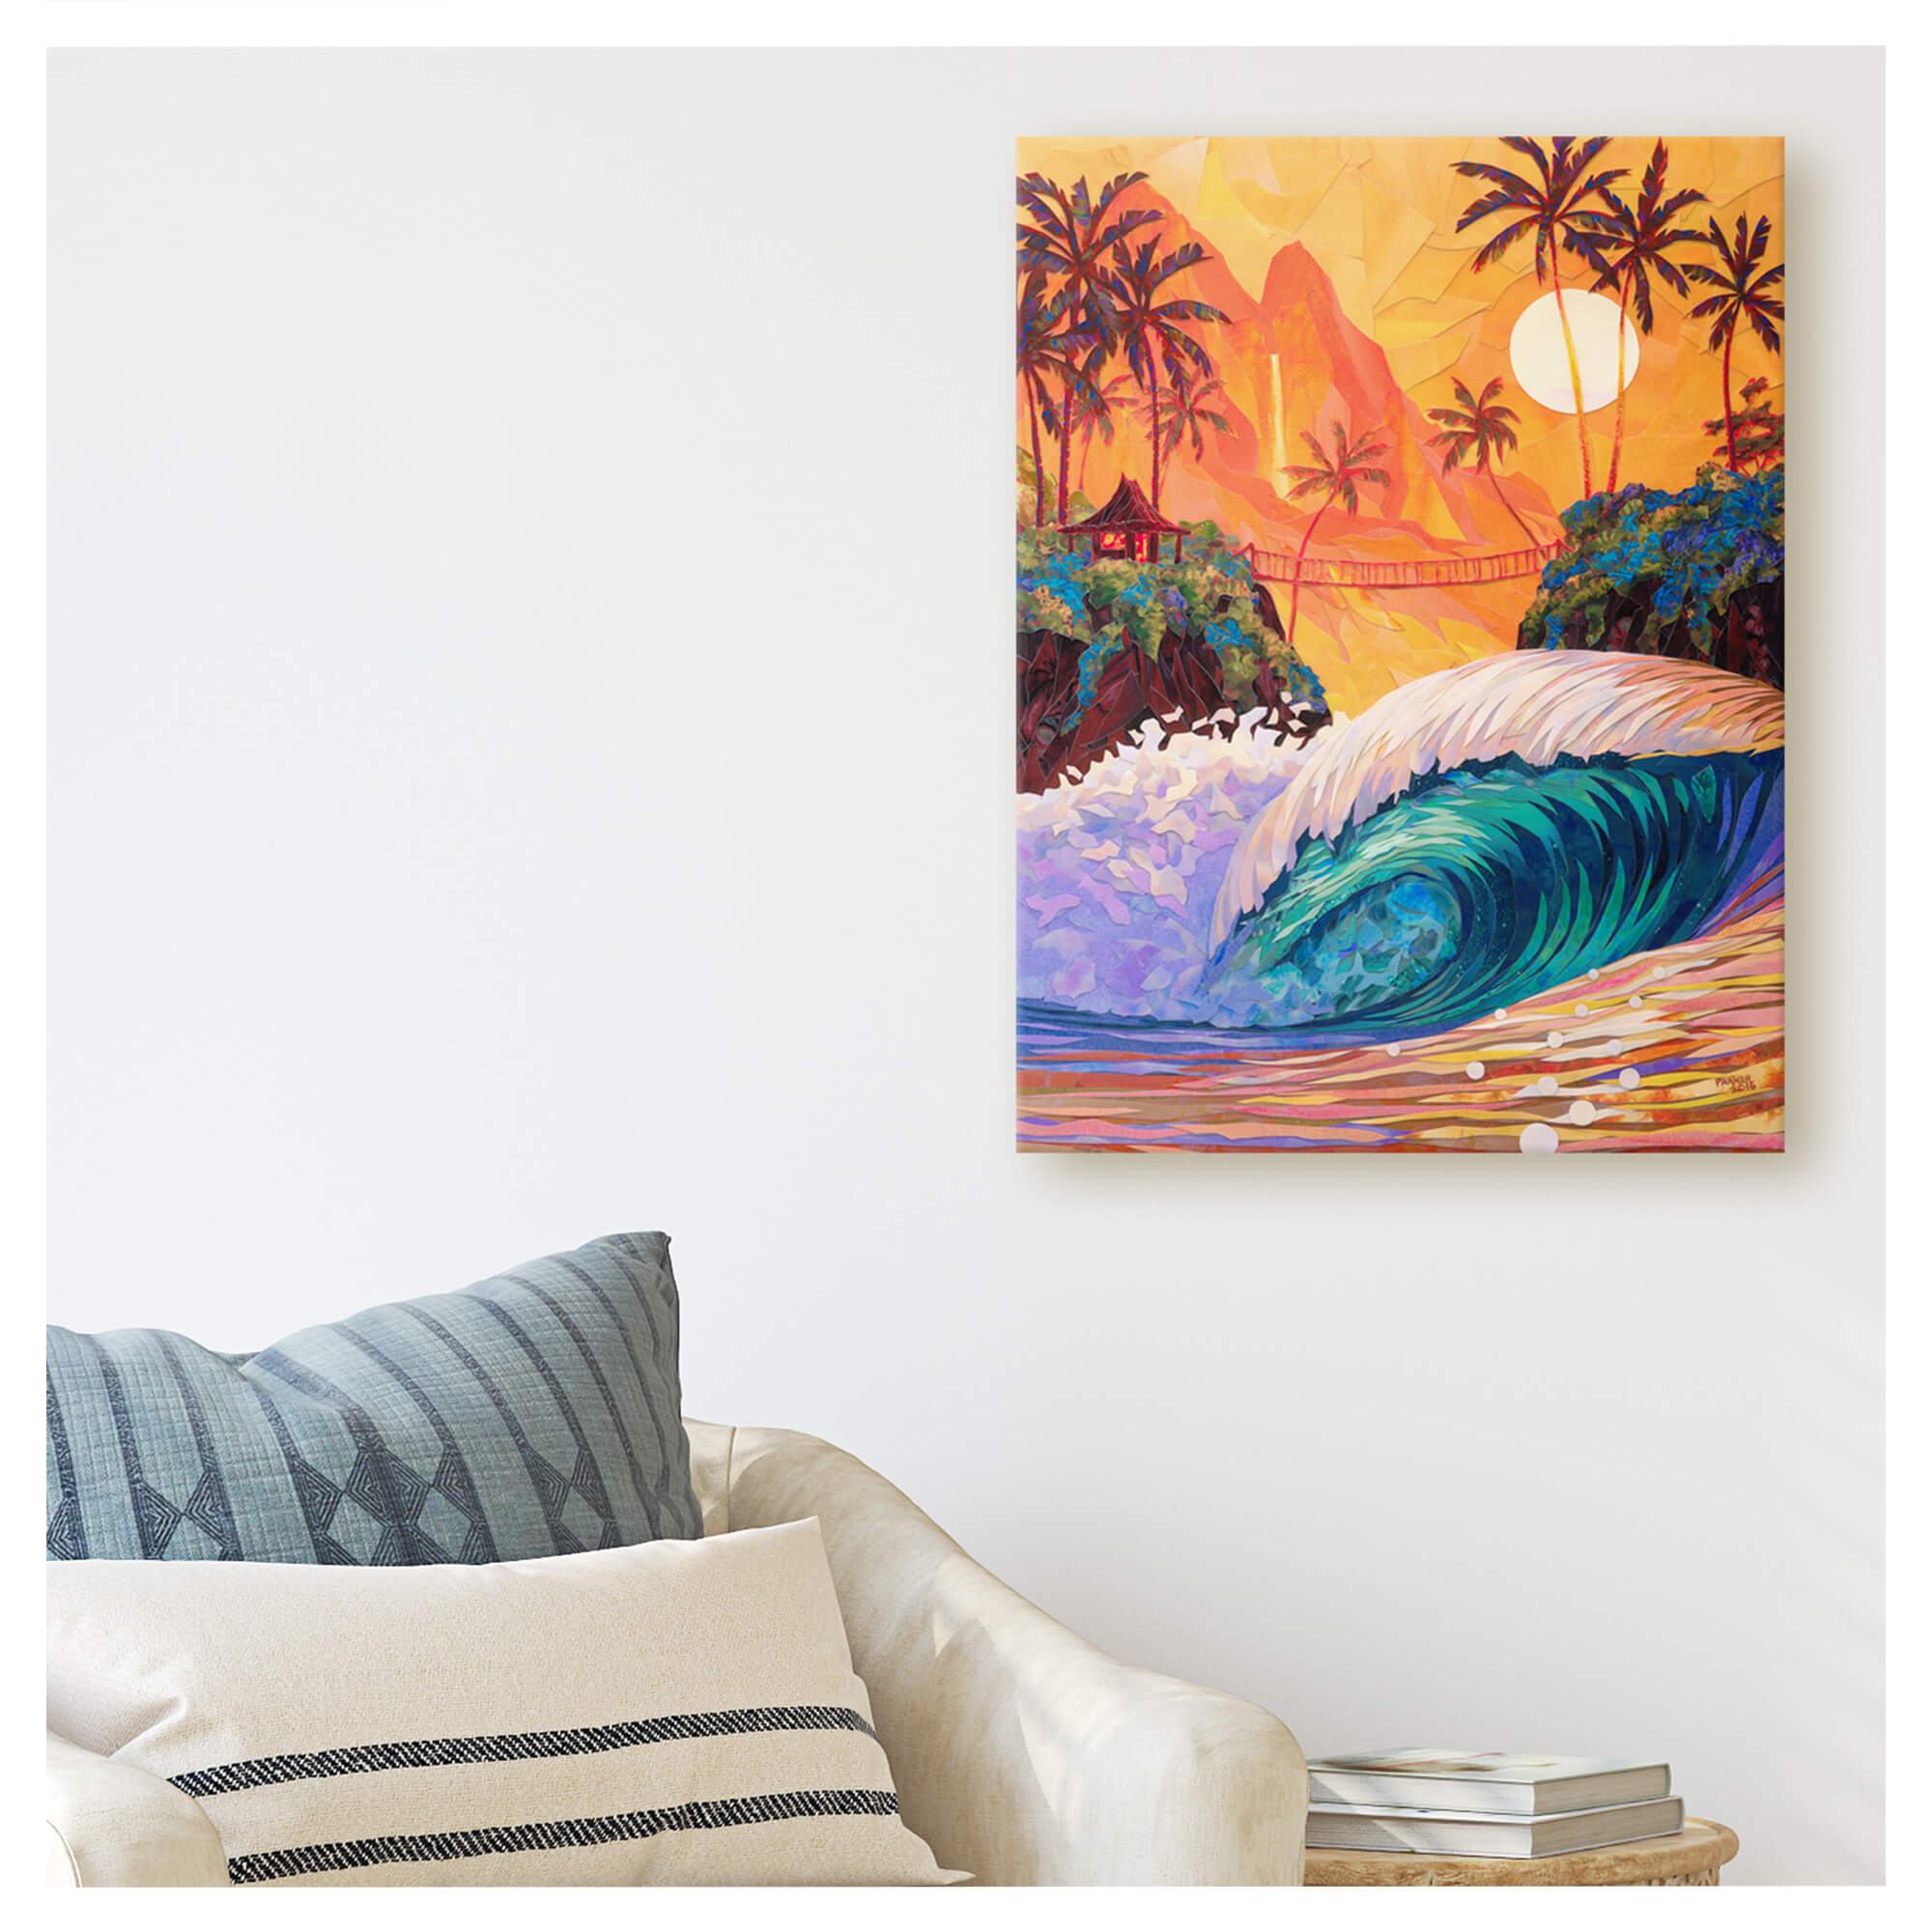 A canvas giclée art print featuring a collage of a vibrant sunset with teal-hued crashing waves, palm trees, and a mountain and waterfall background by Hawaii artist Patrick Parker